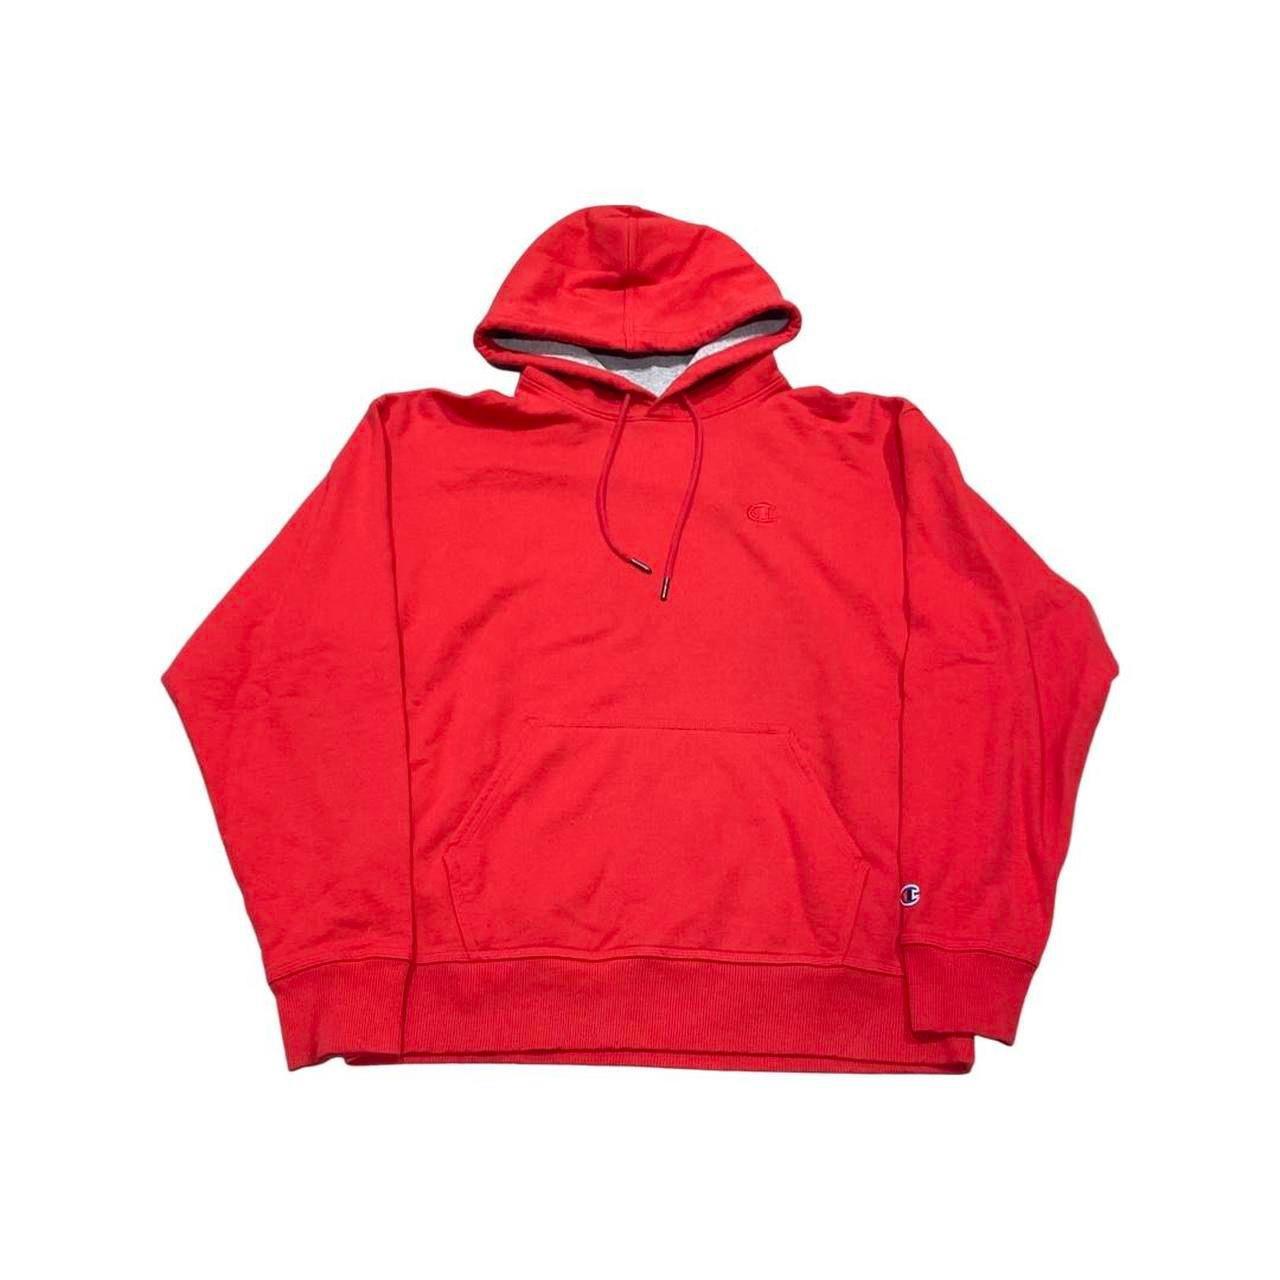 Product Image 1 - VINTAGE CHAMPION HOODIE

-MID 00s
-CHAMPION TAG

CHEST: